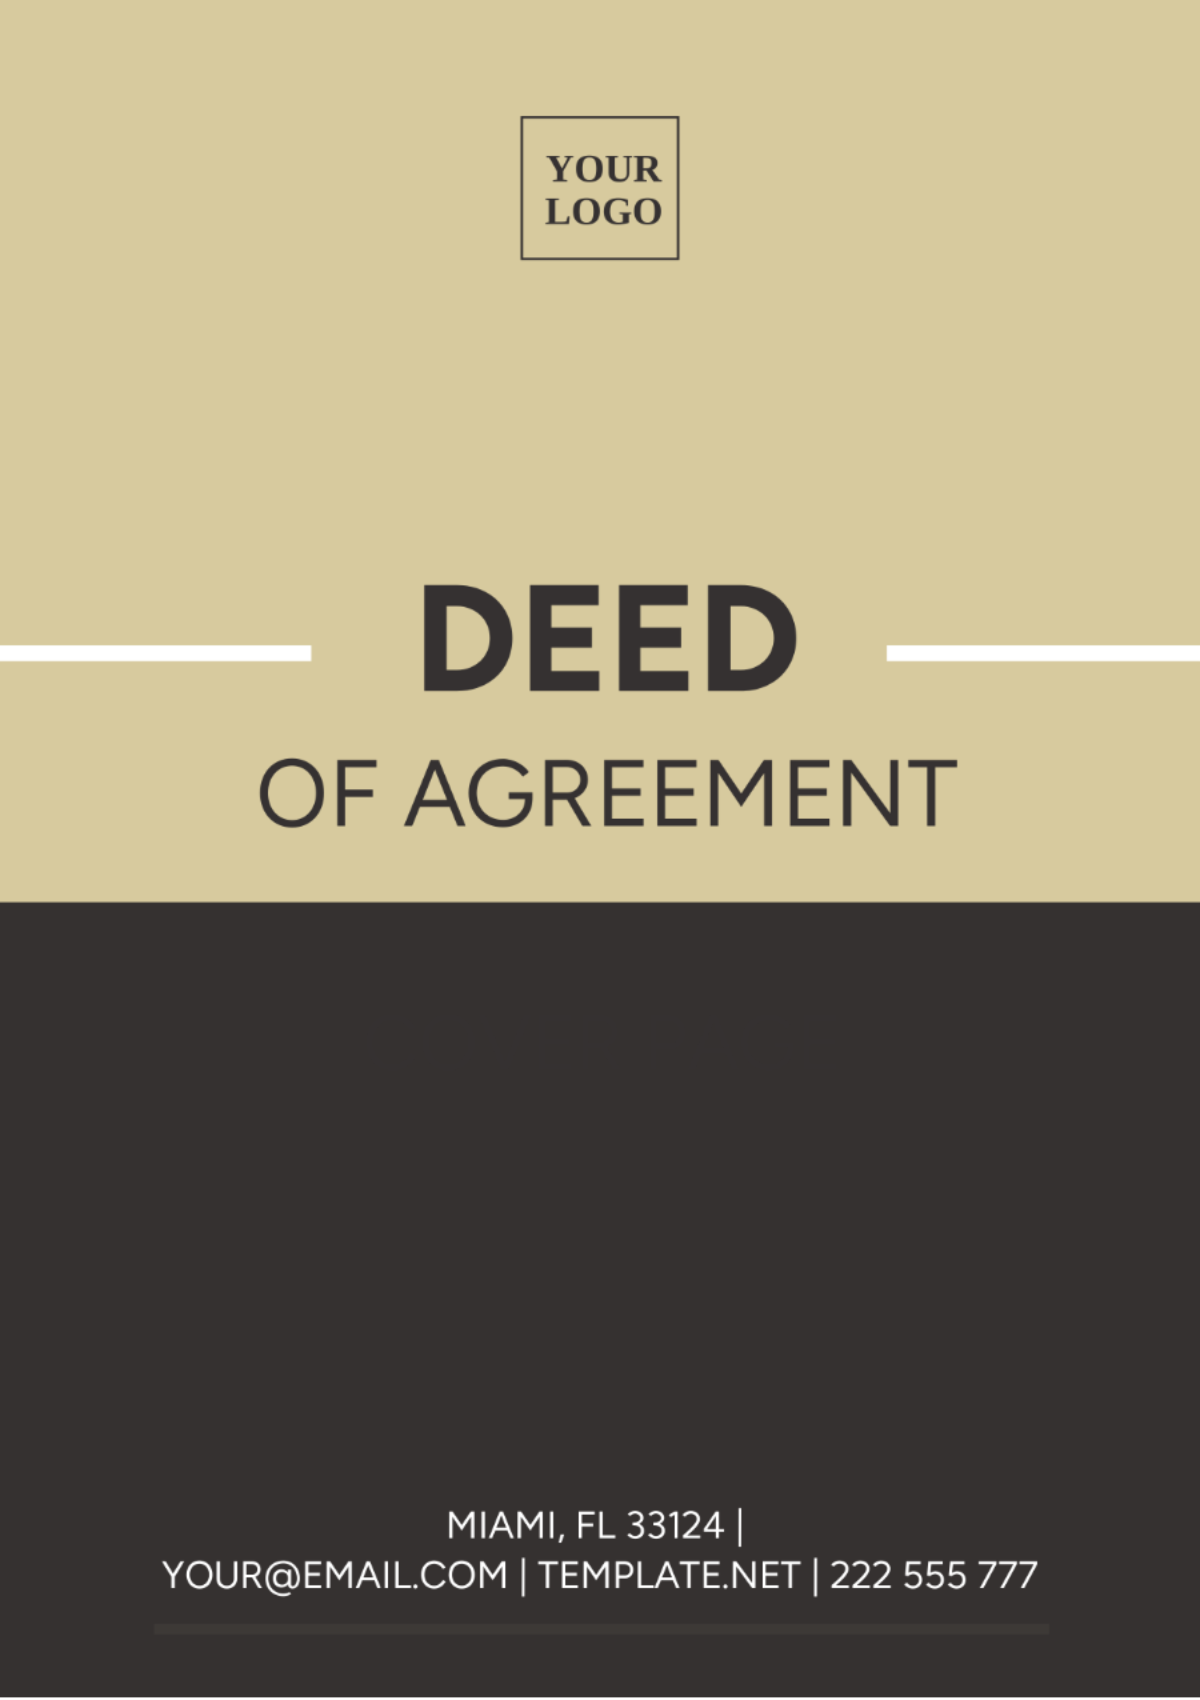 Deed of Agreement Template